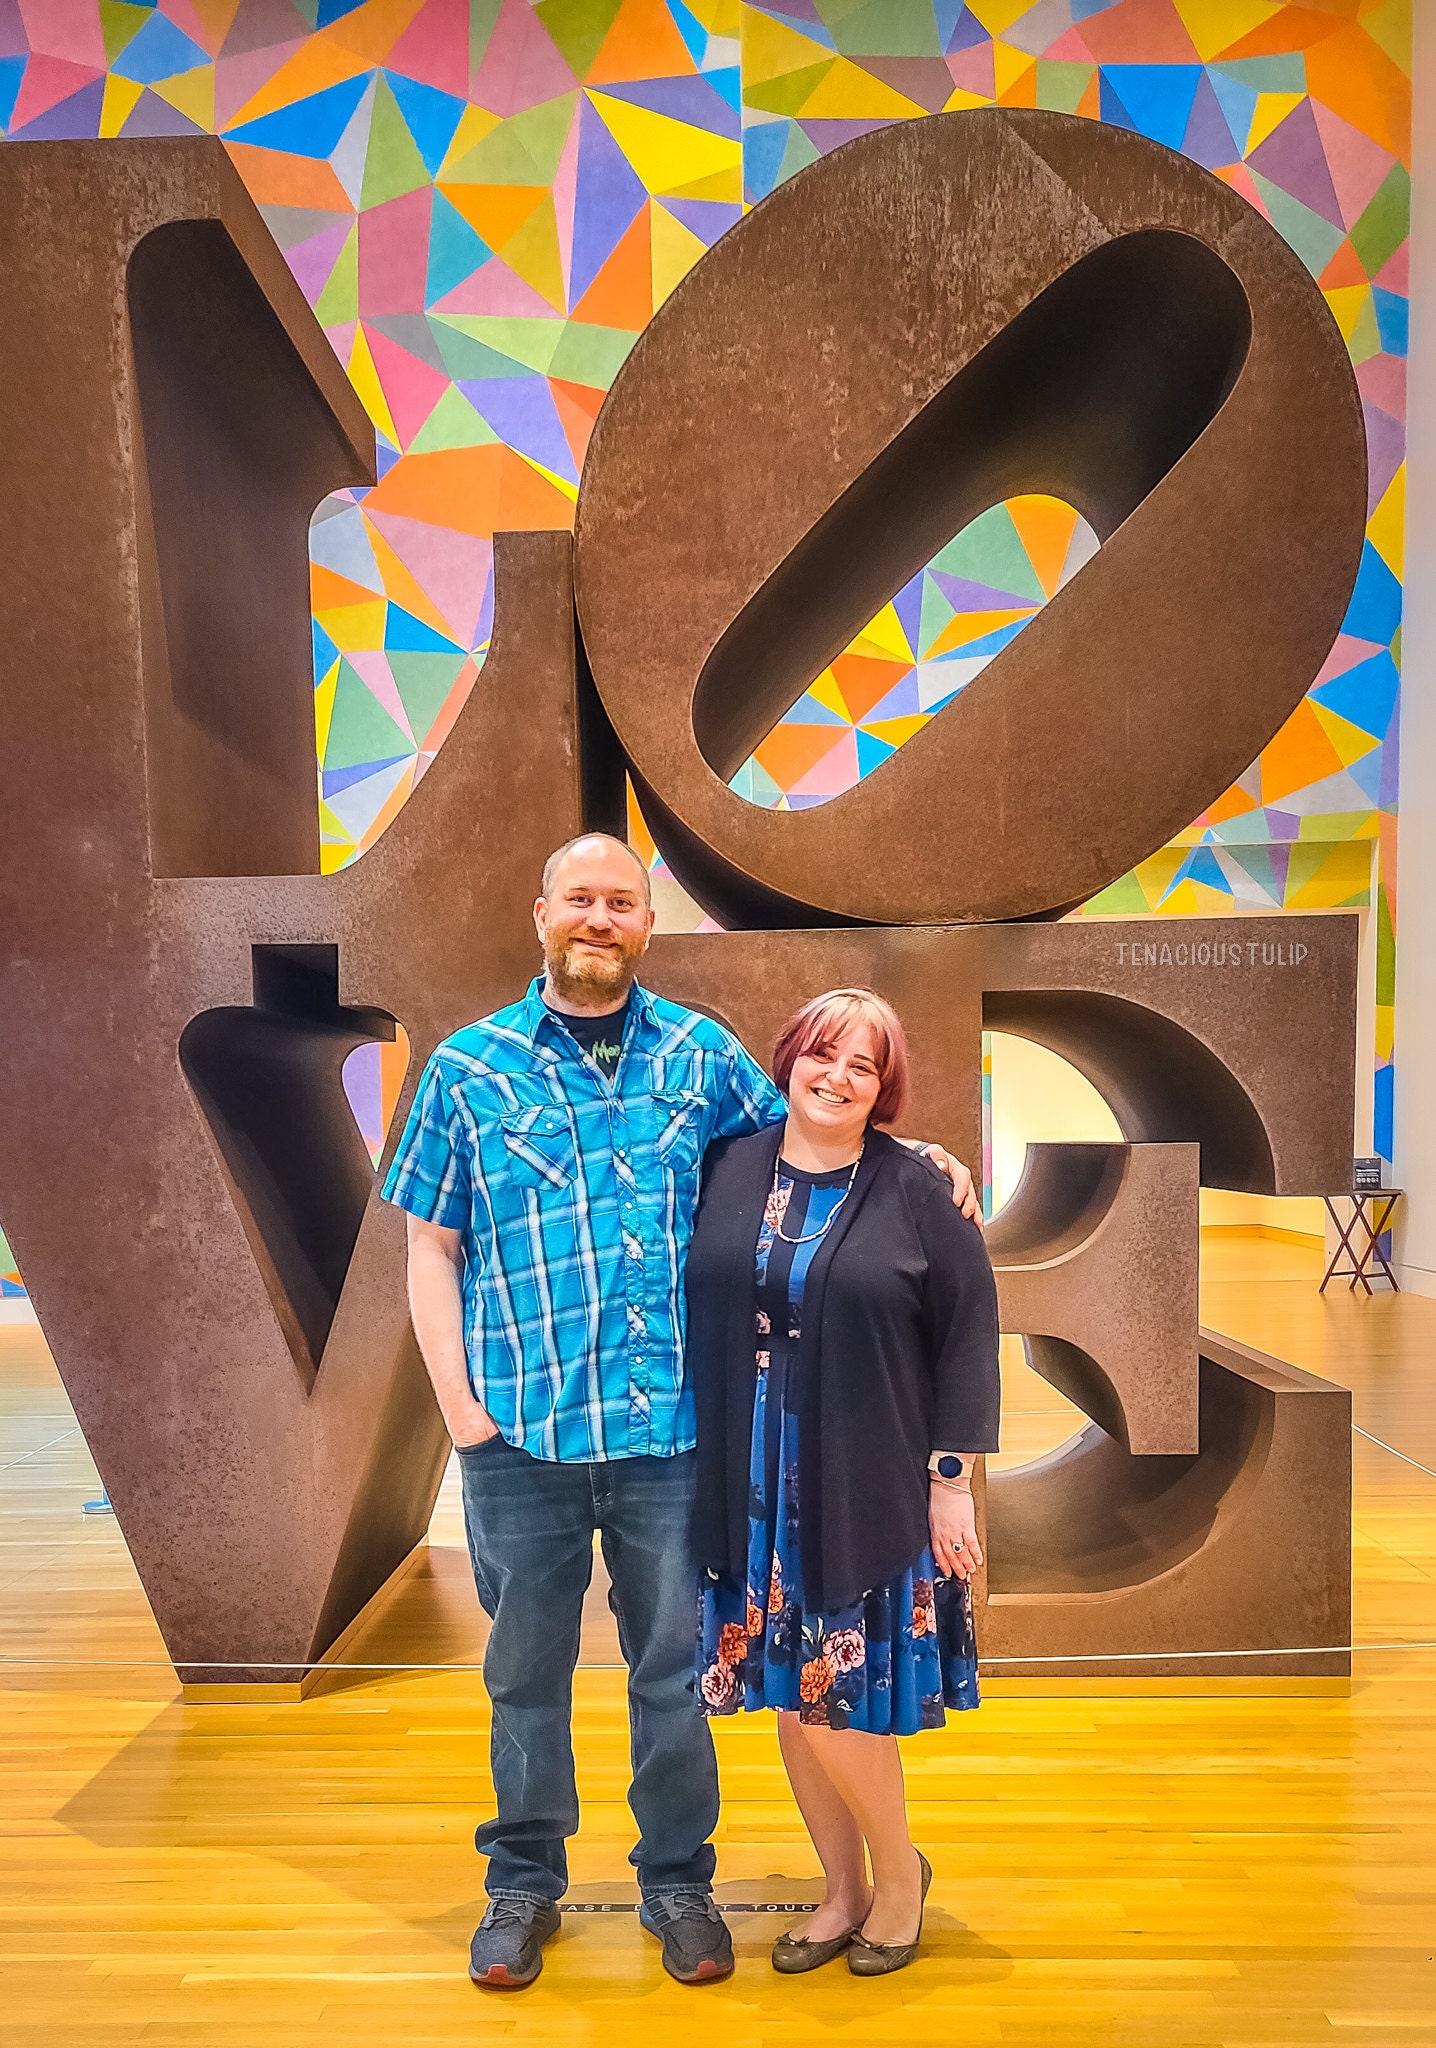 Man in a blue shirt and jeans, woman in a dress and black sweater stand in front of a statue spelling LOVE